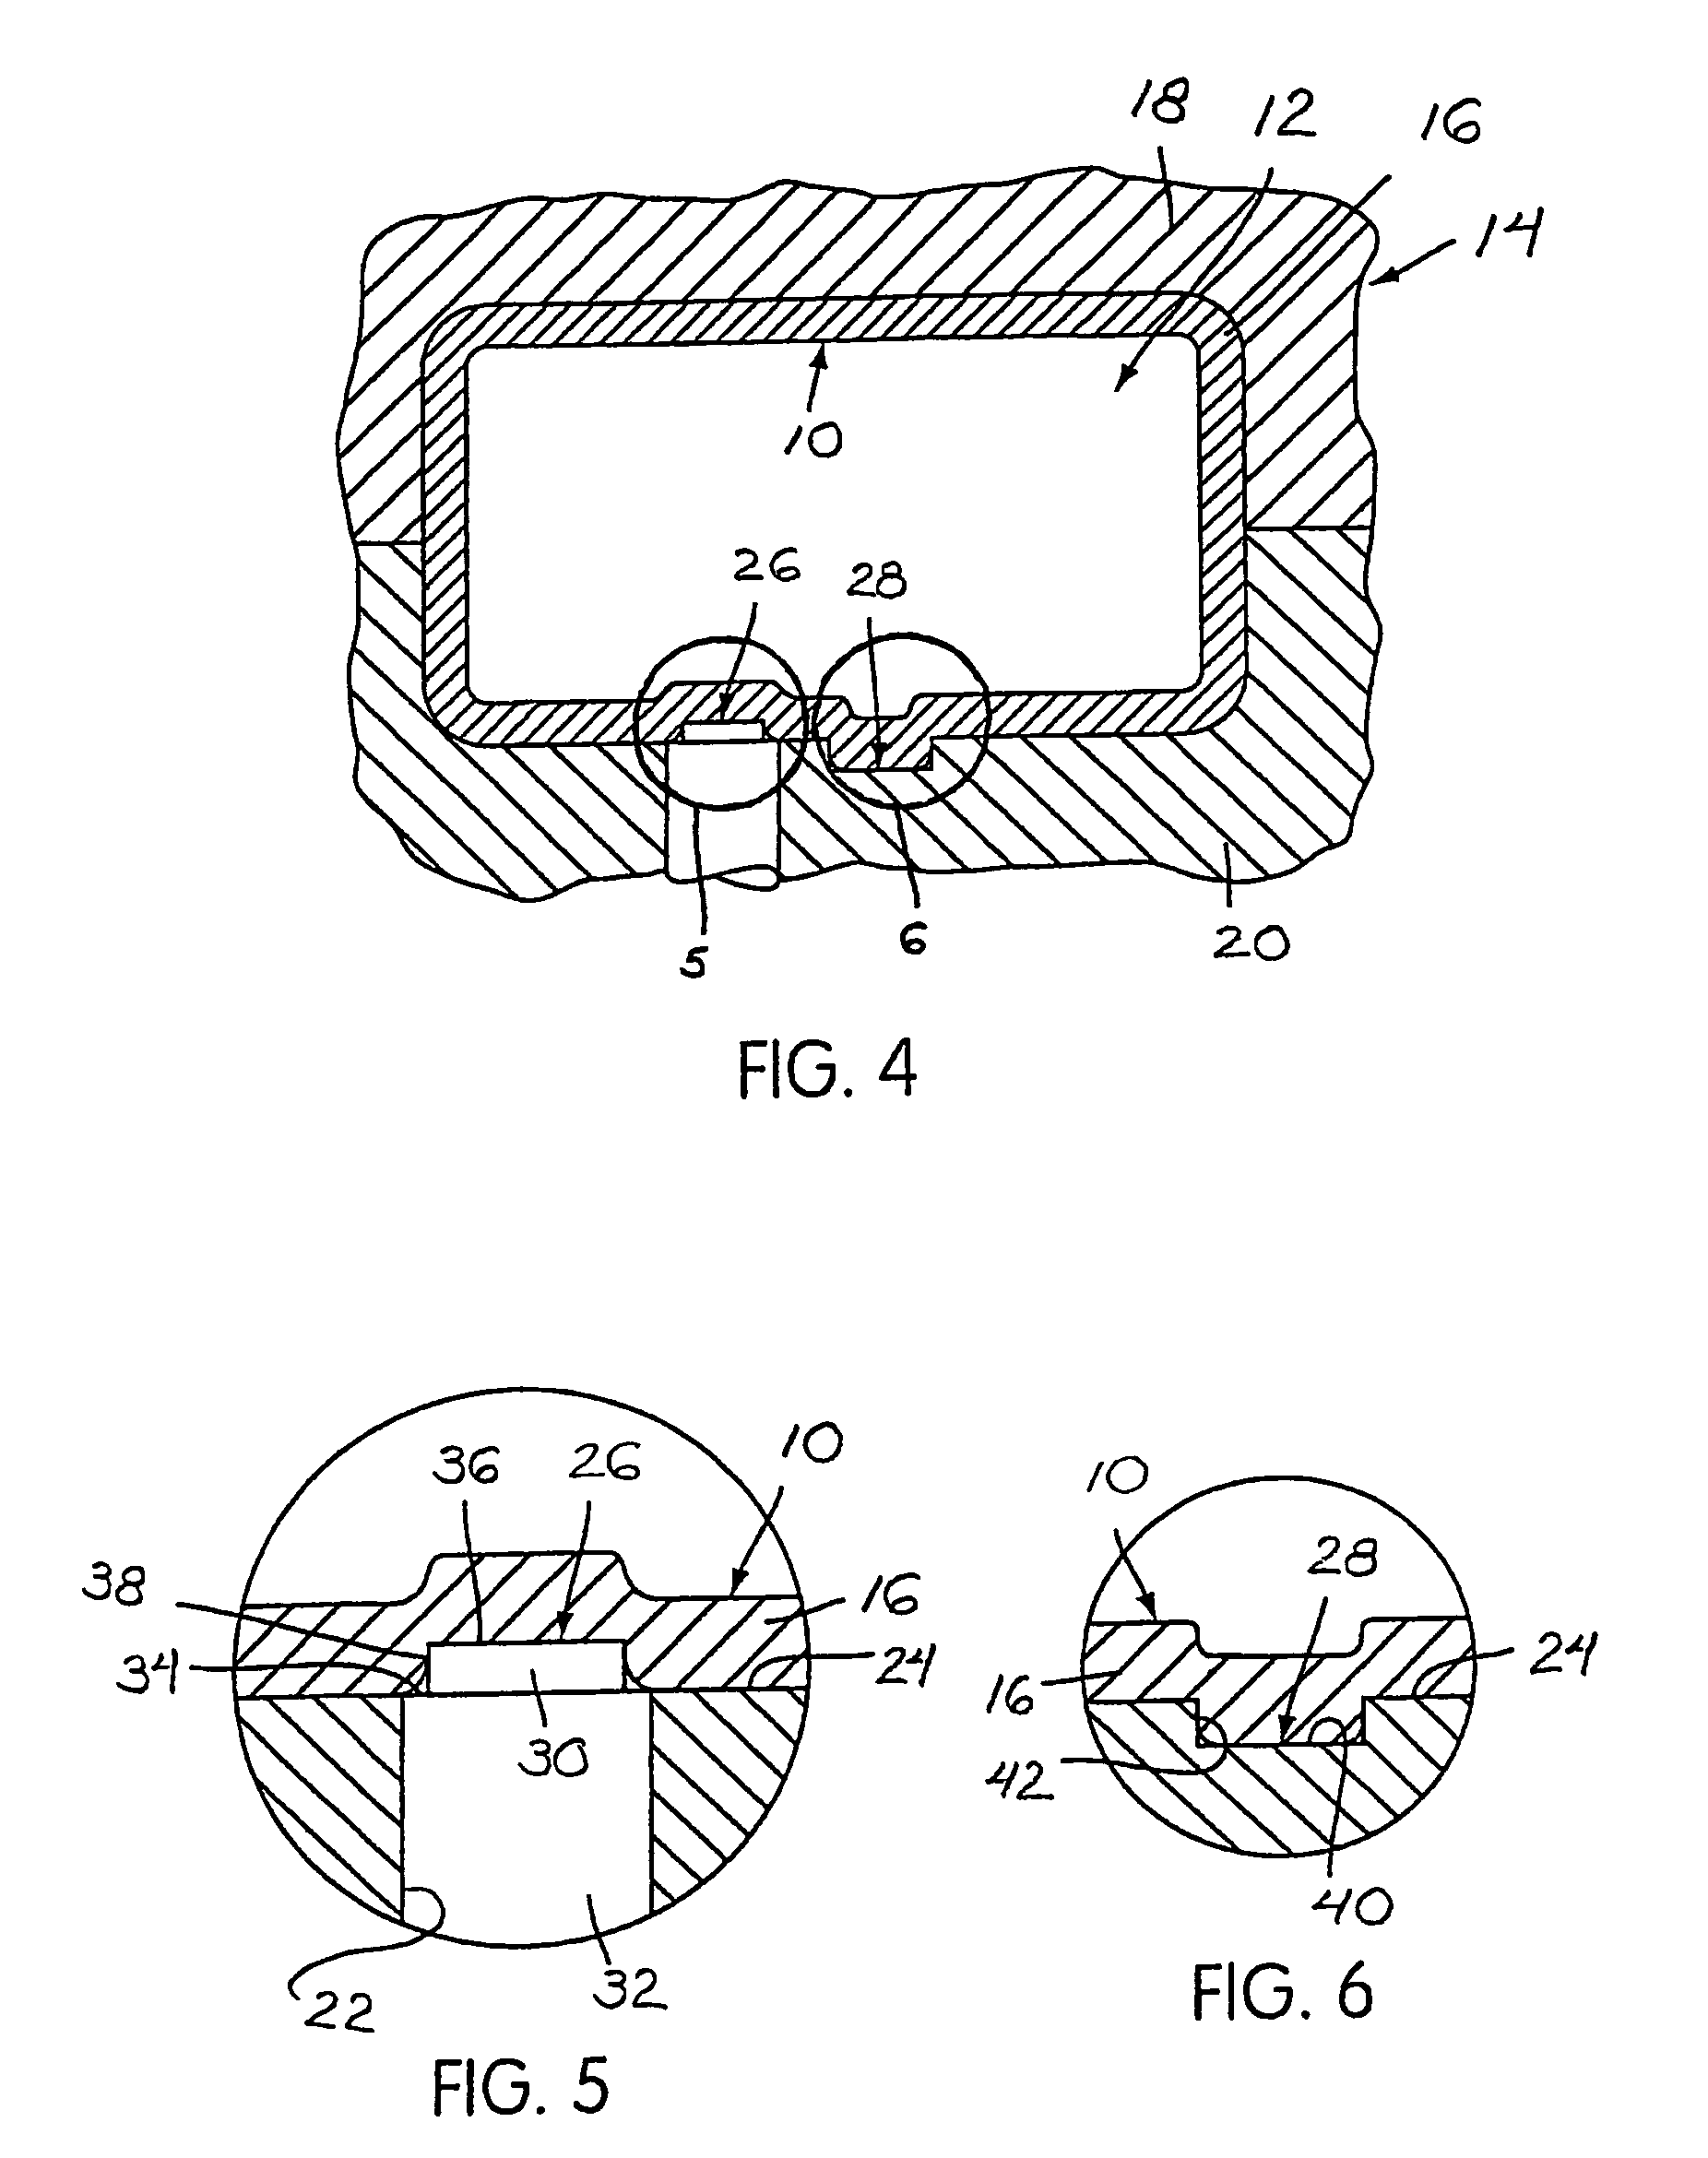 Method of forming hydroformed member with opening